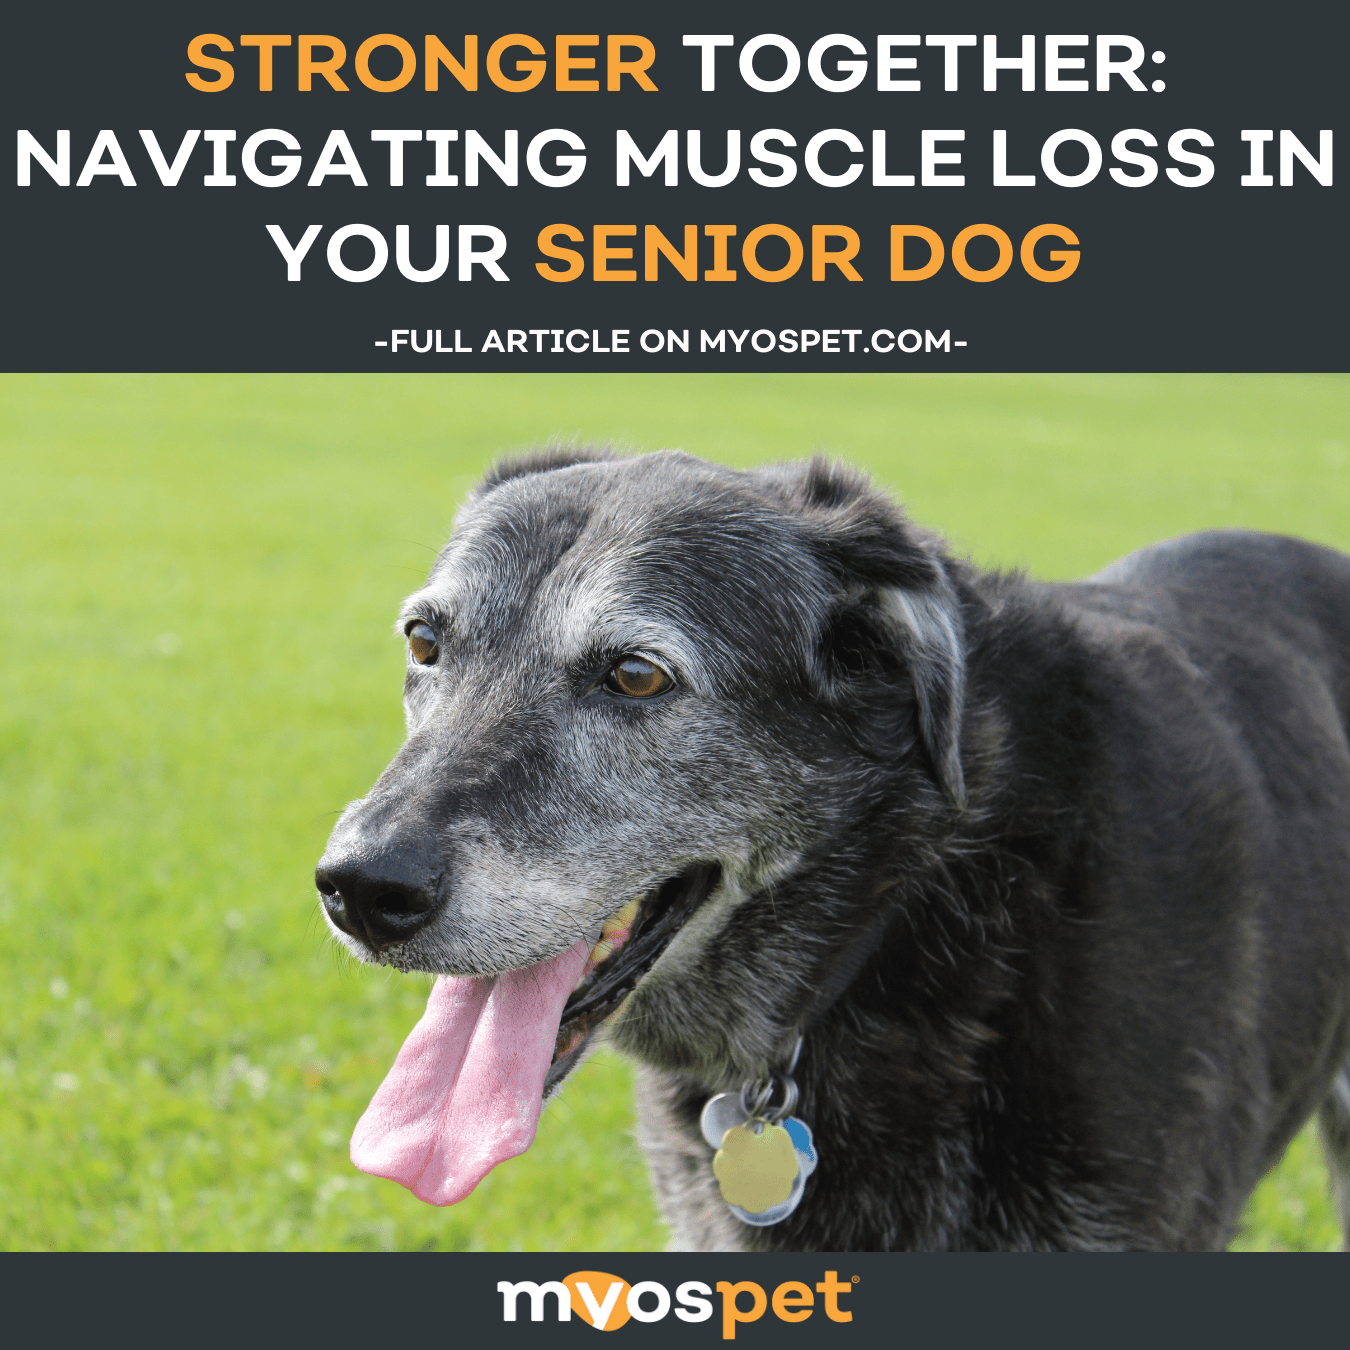 Stronger Together: Navigating Muscle Loss in Your Senior Dog